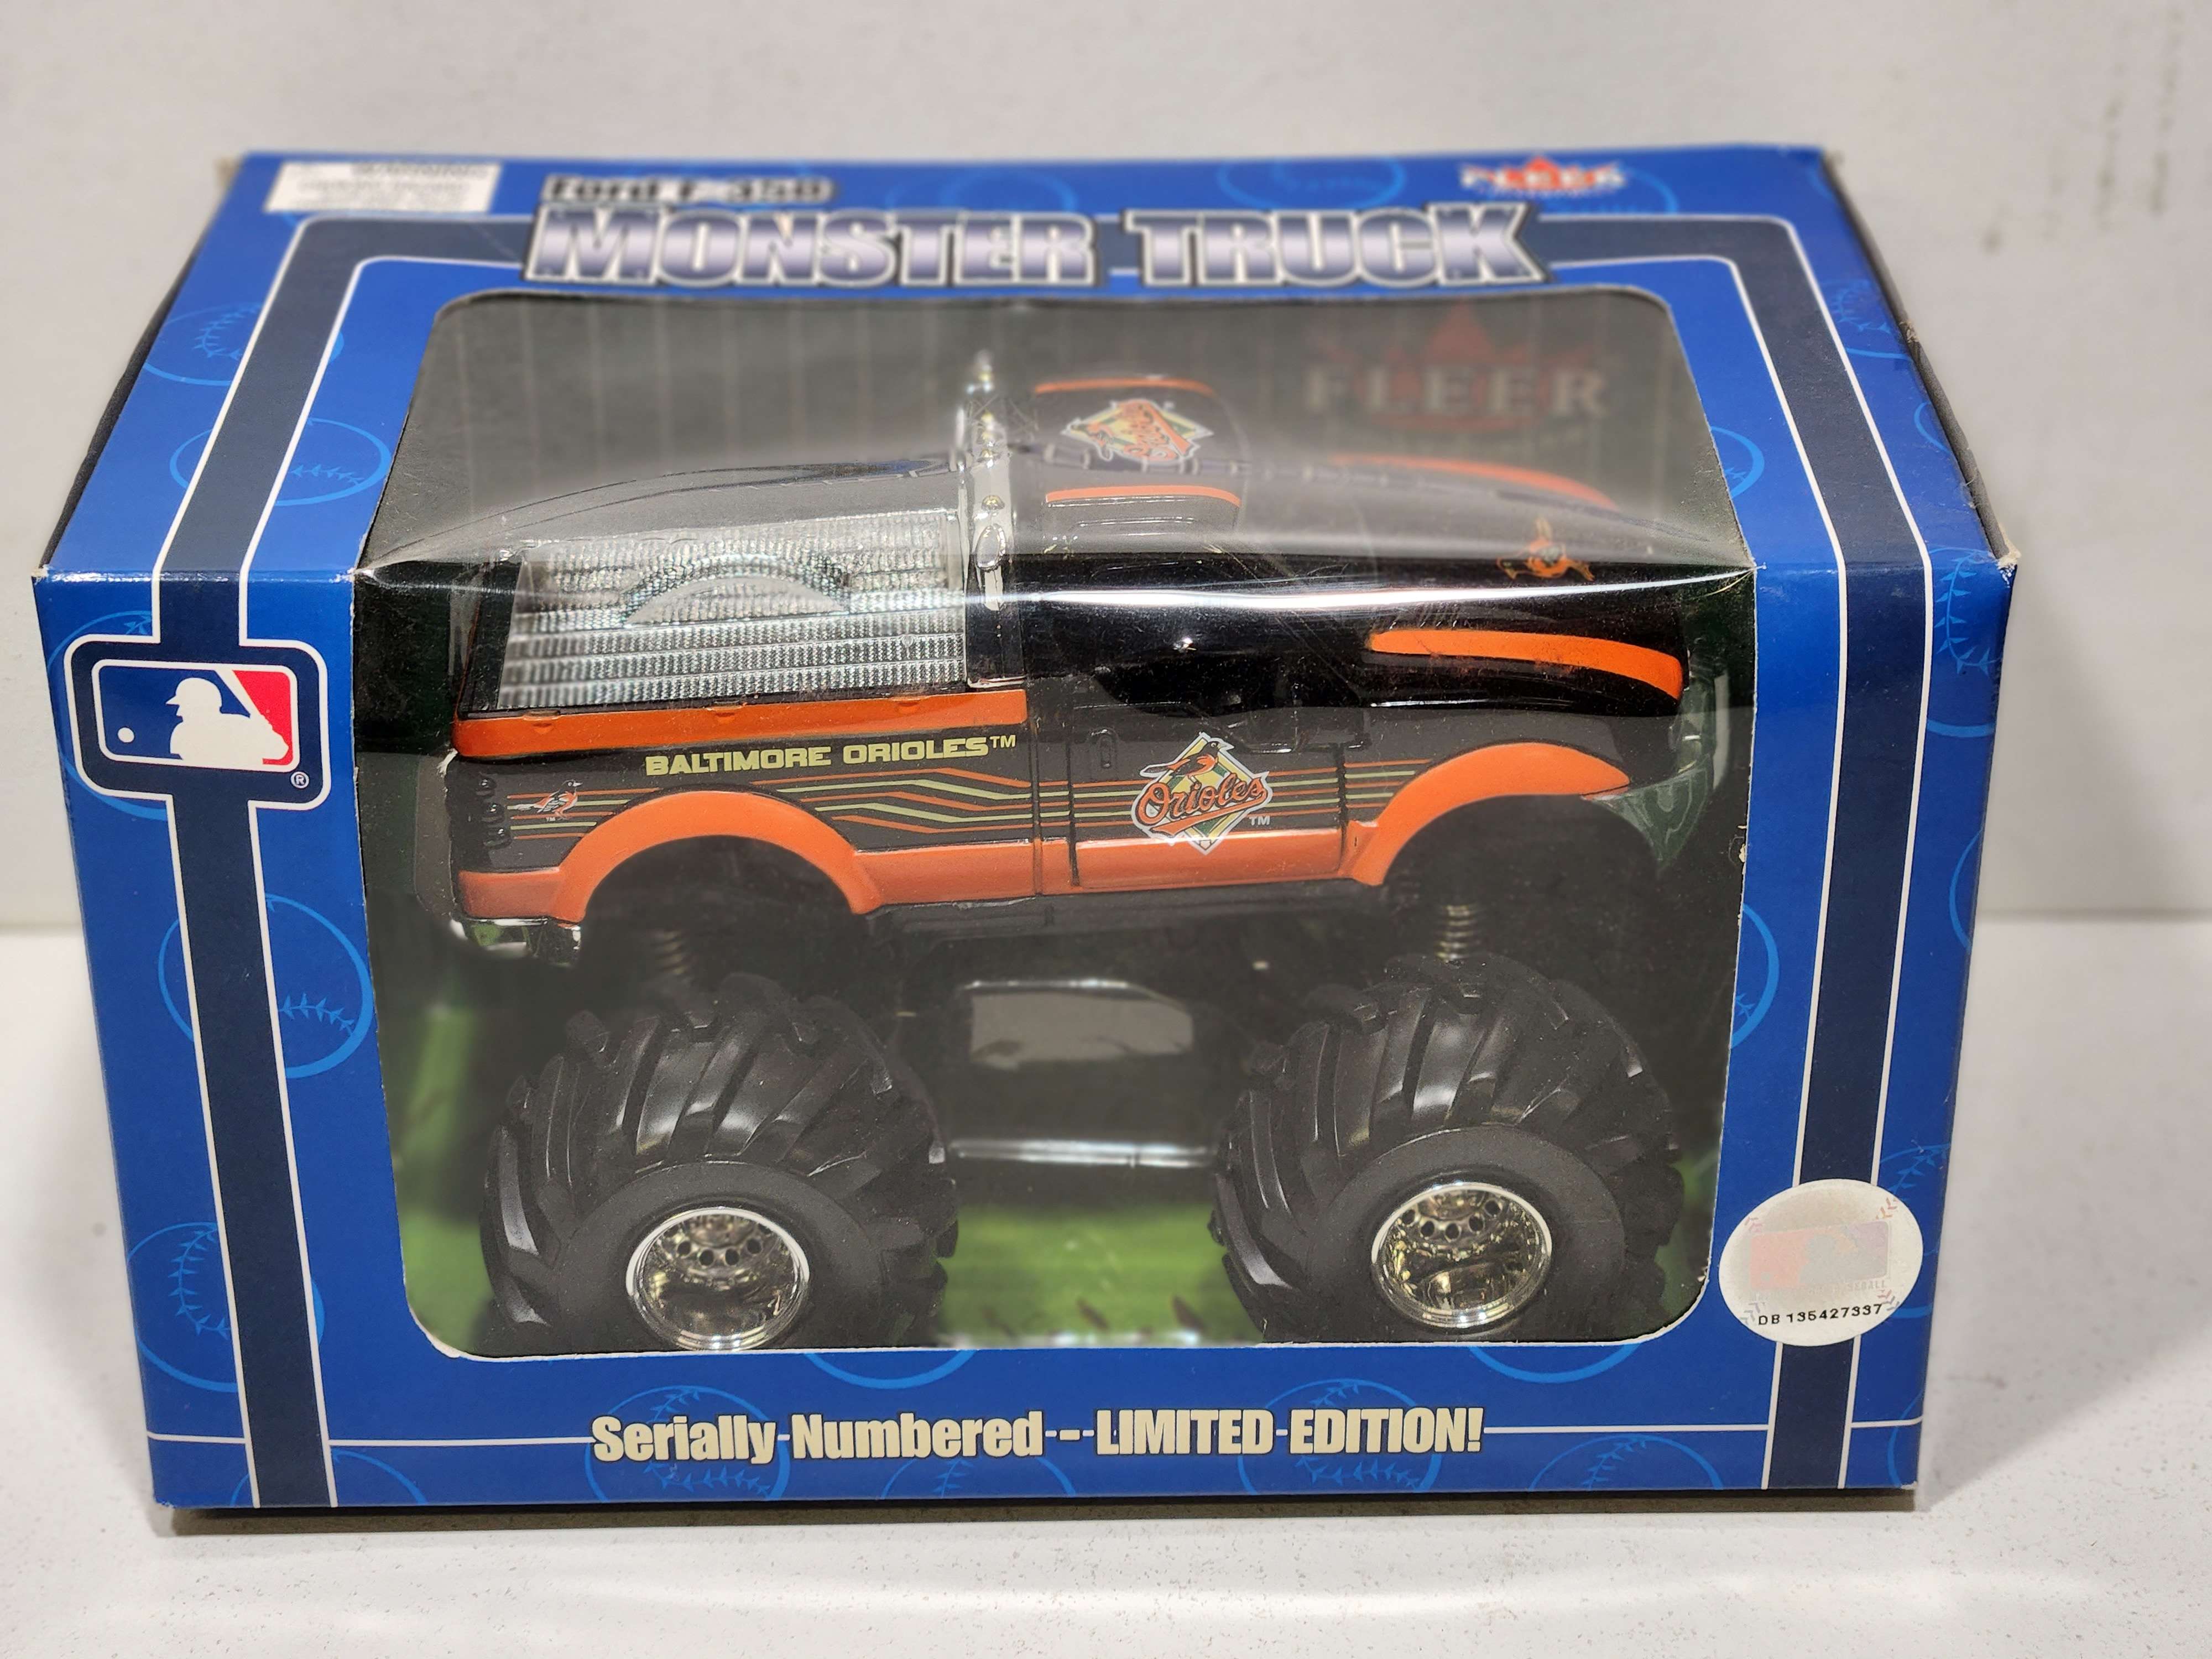 2003 Baltimore Orioles 1/32nd Ford F-350 Monster truck